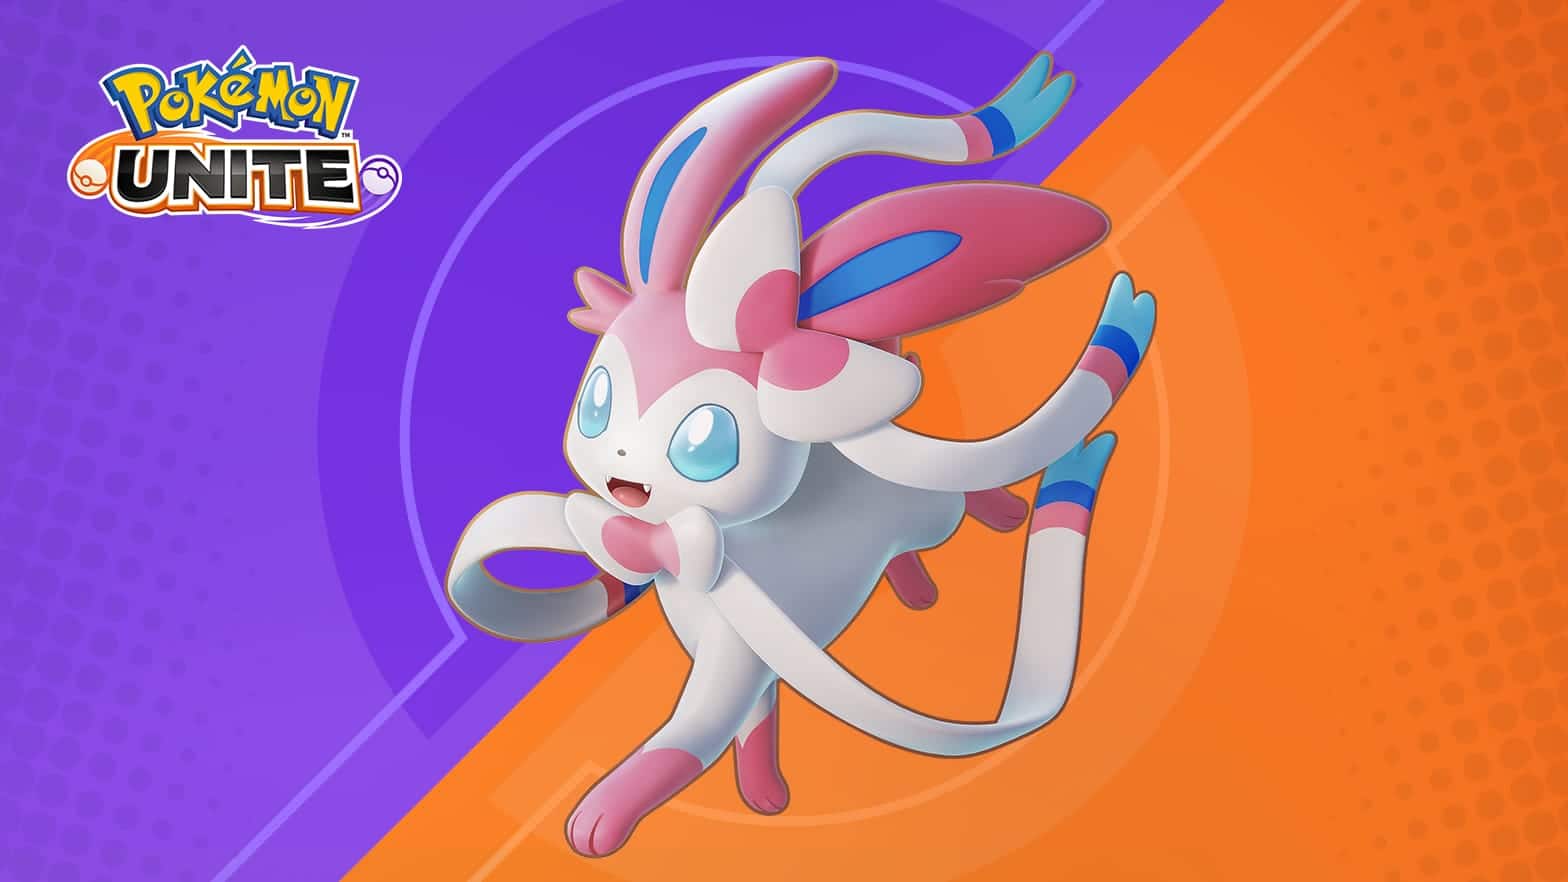 Sylveon is now available in Pokemon Unite